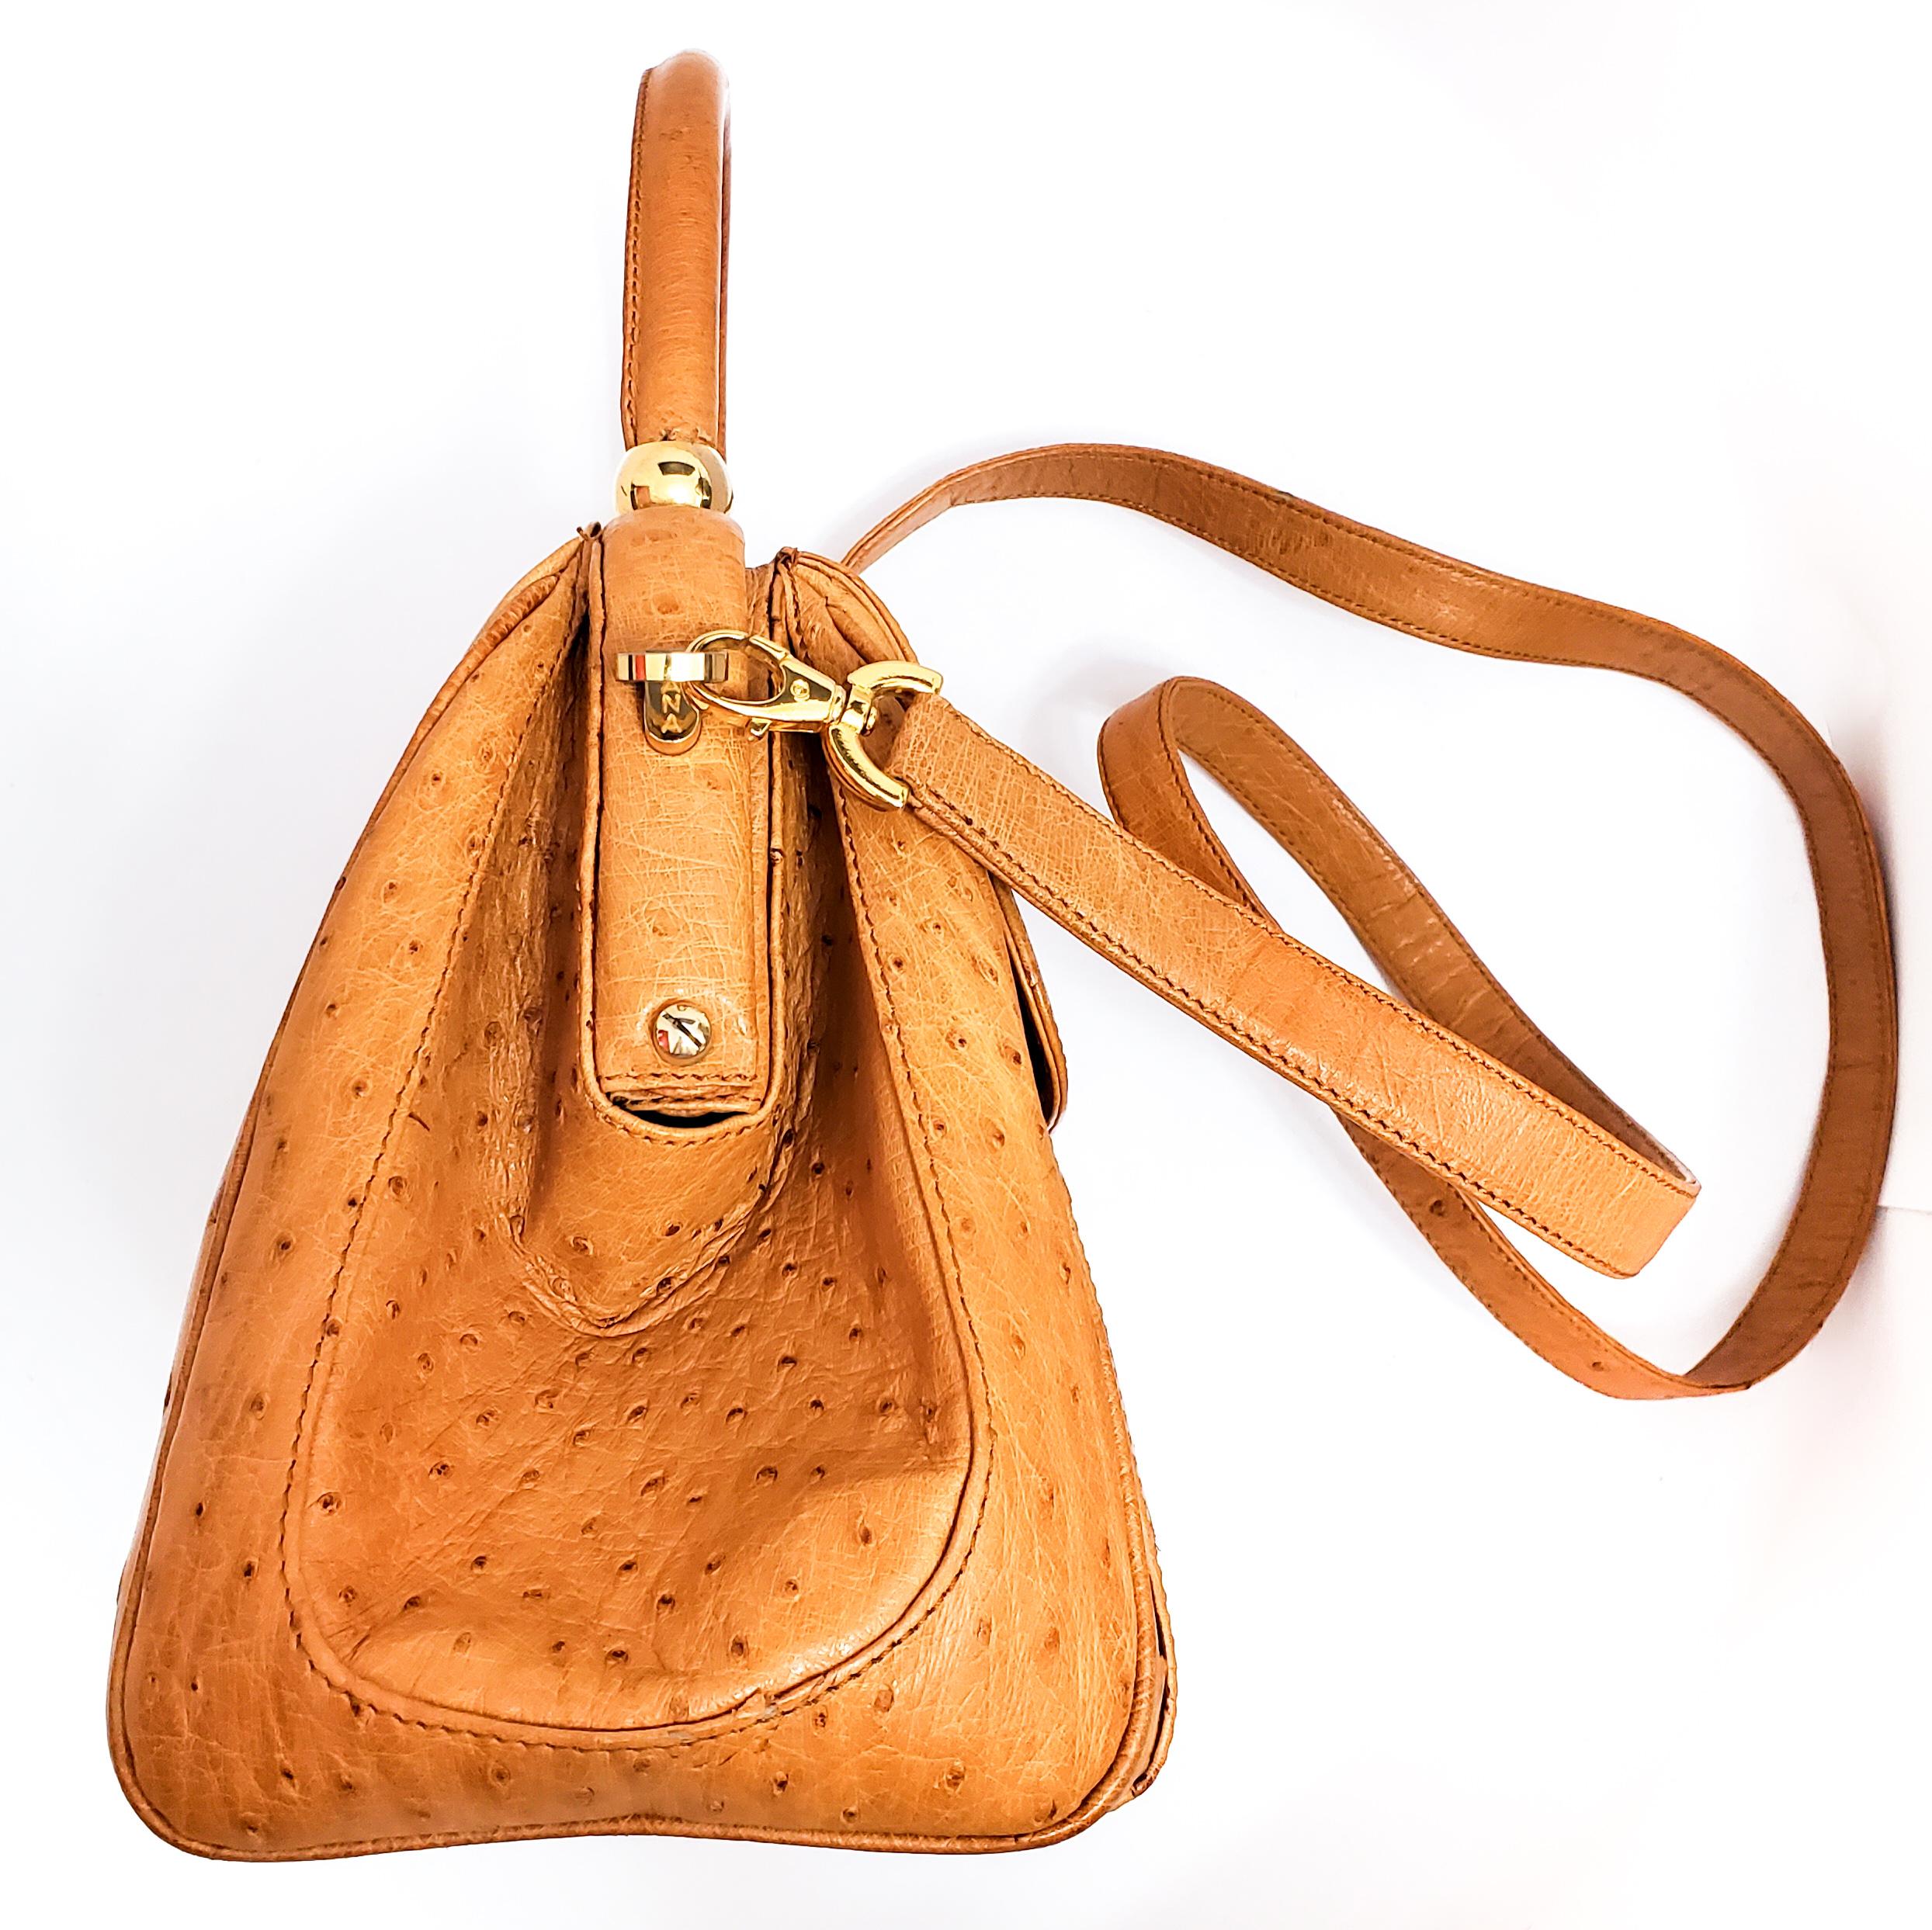 Lana Marks is known world wide for stunning beautifully crafted handbags.  This honey ostrich convertible bag is highly collectable and sought after.  Top handle is permanent with a drop of 4 1/2